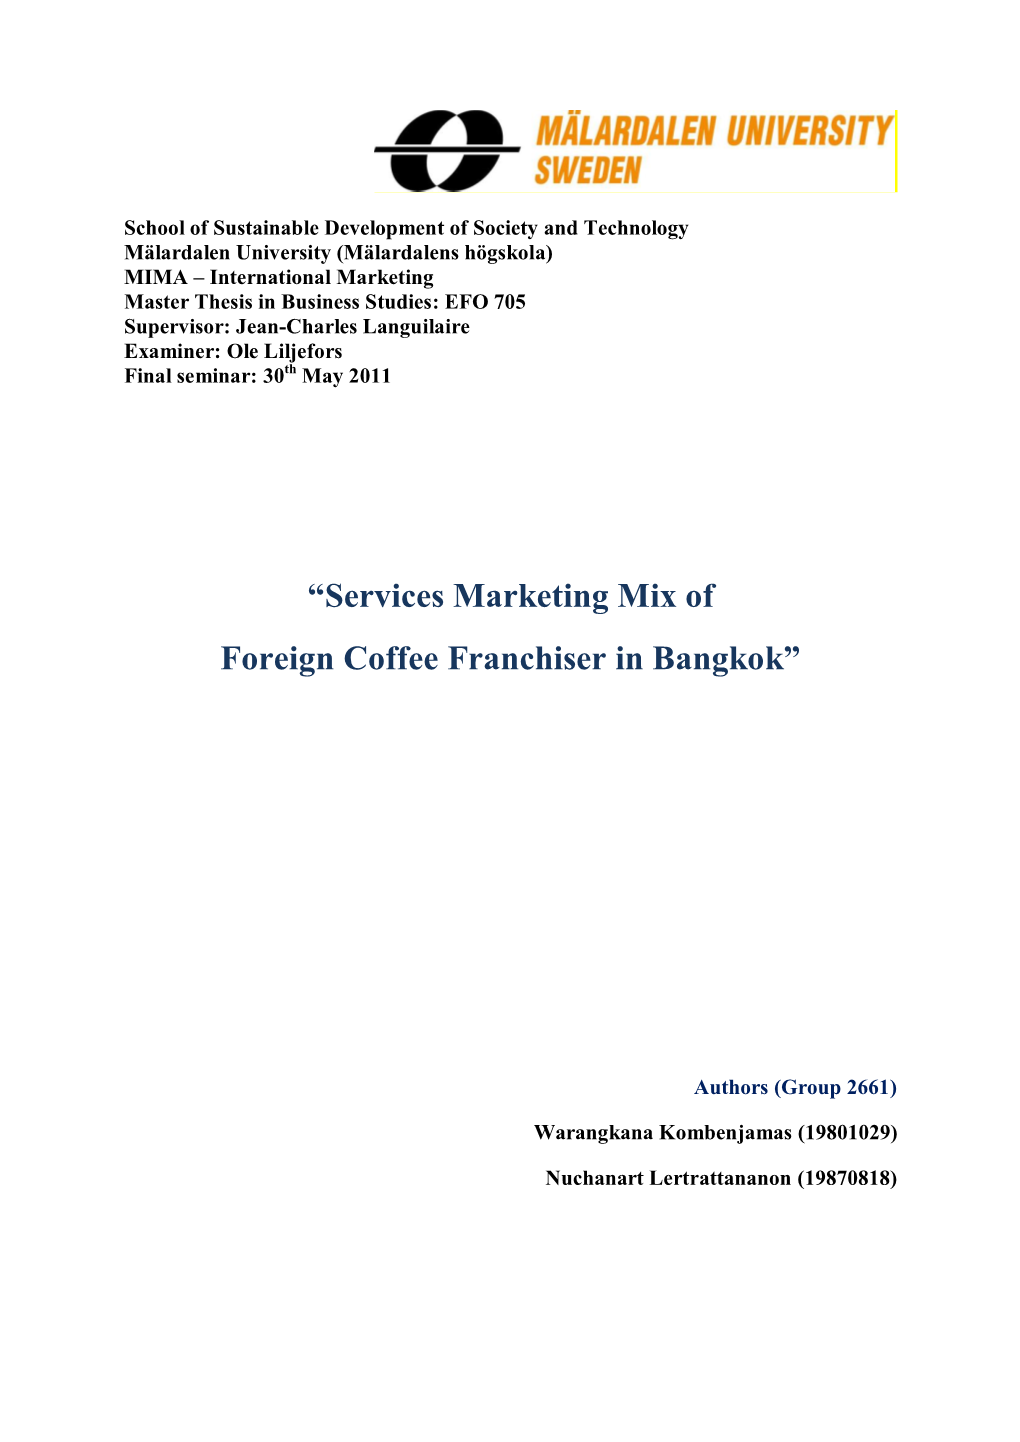 “Services Marketing Mix of Foreign Coffee Franchiser in Bangkok”